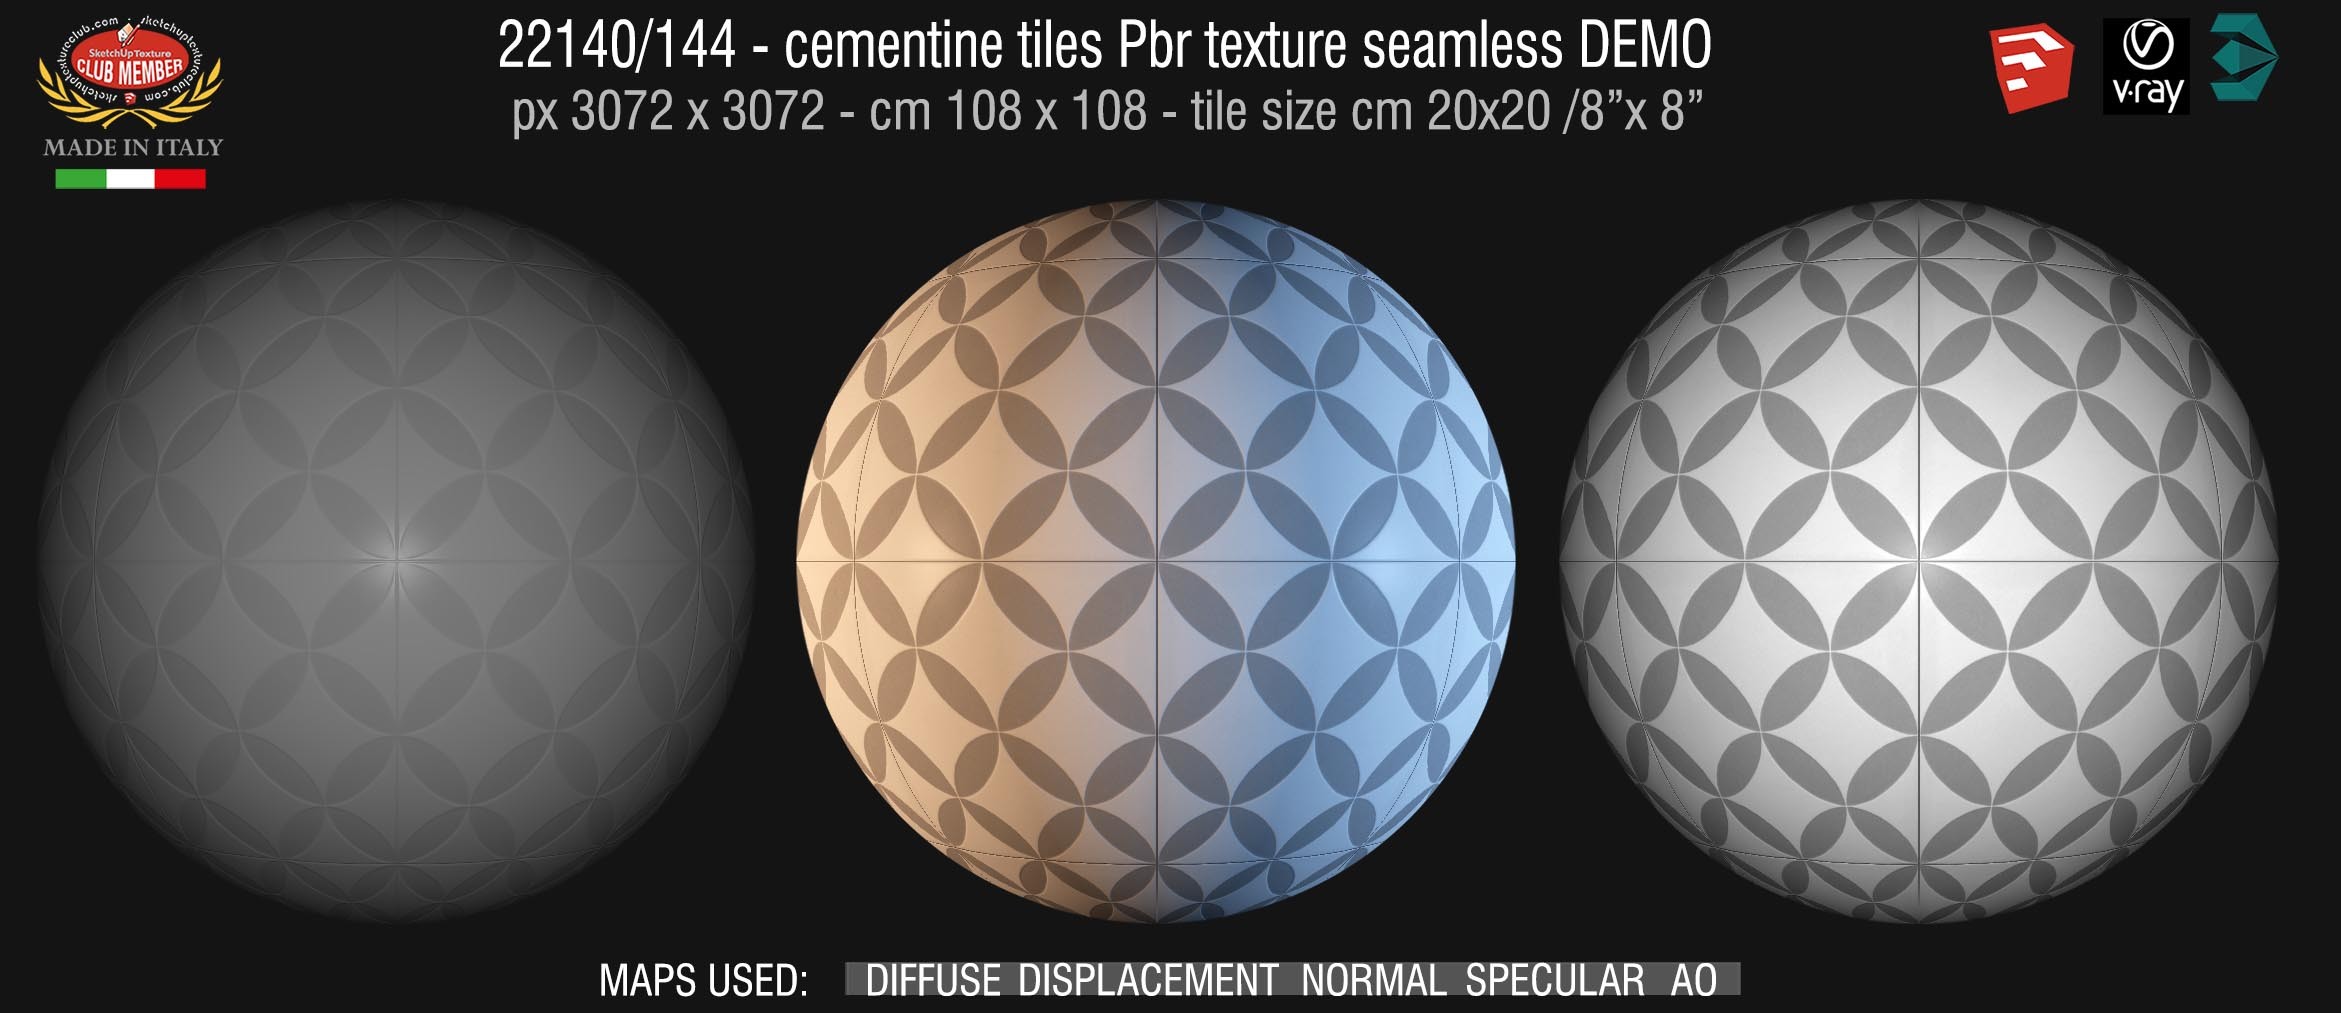 22140/144 cementine tiles Pbr texture seamless DEMO - Contrasti collection Tappeto 3 by RAGNO